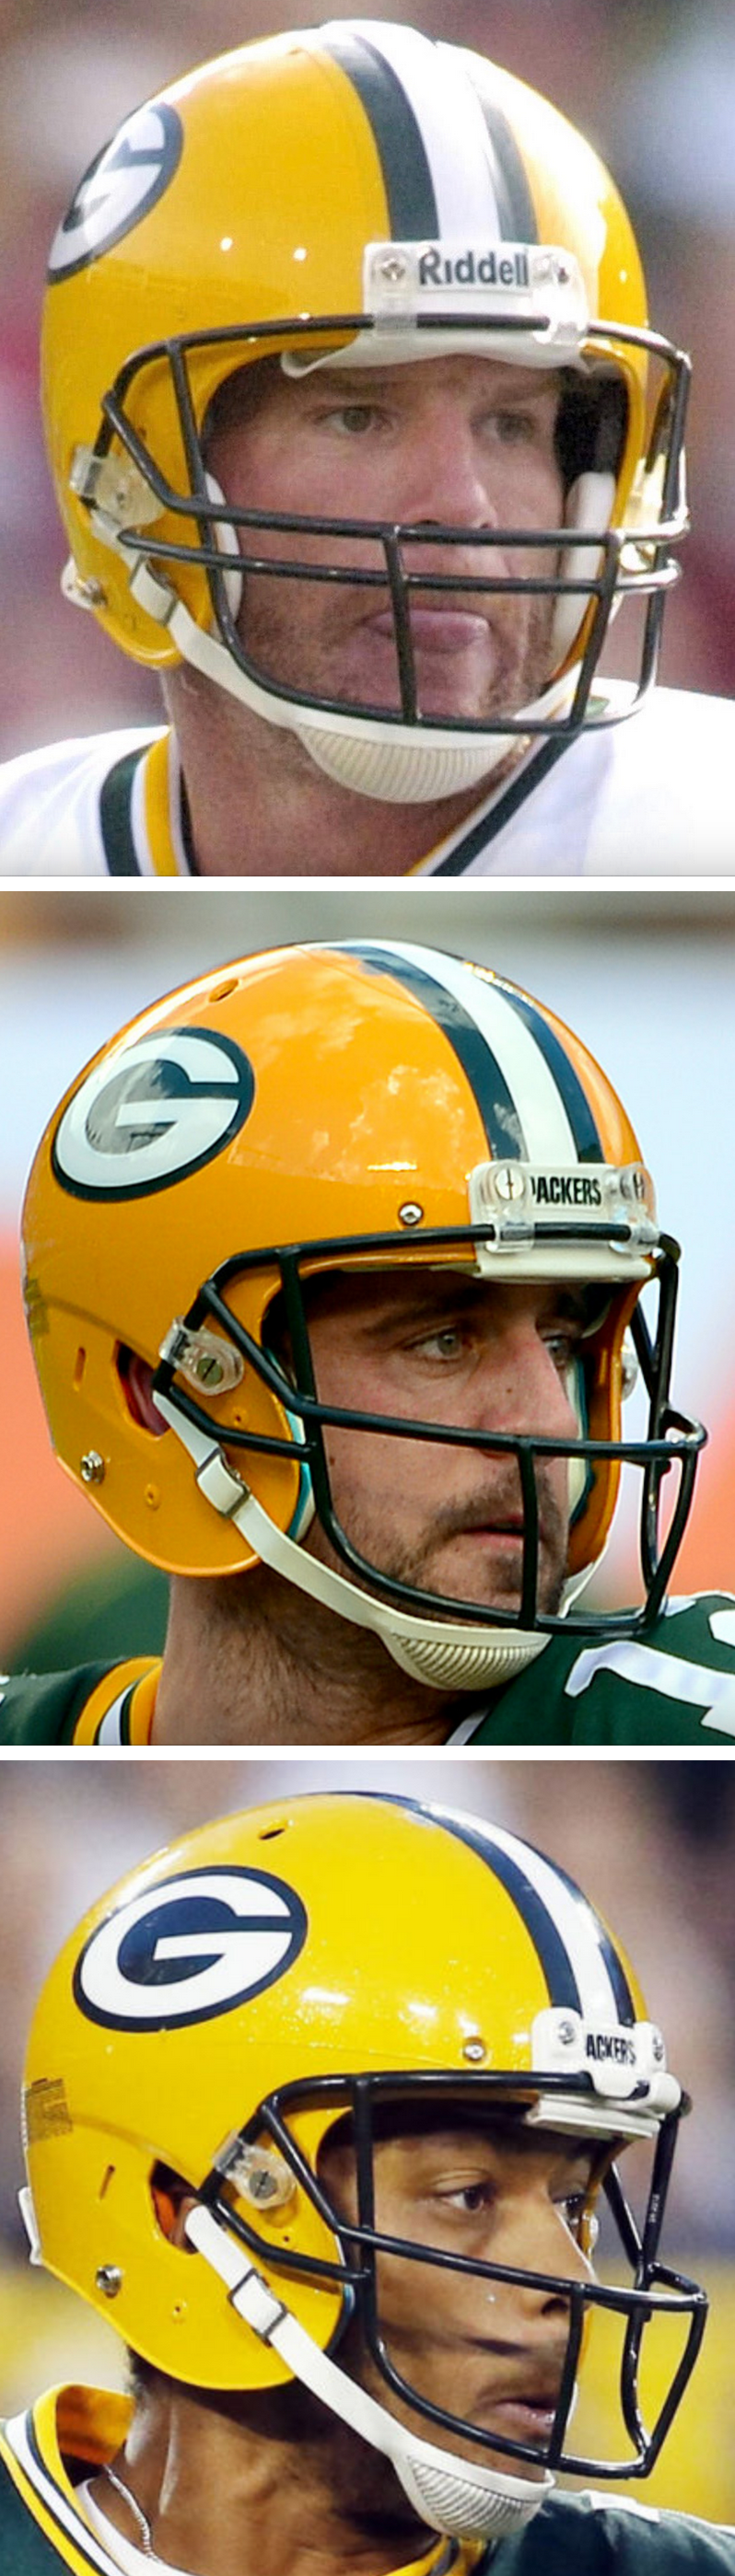 Could the Green Bay Packers pull off a white helmet?